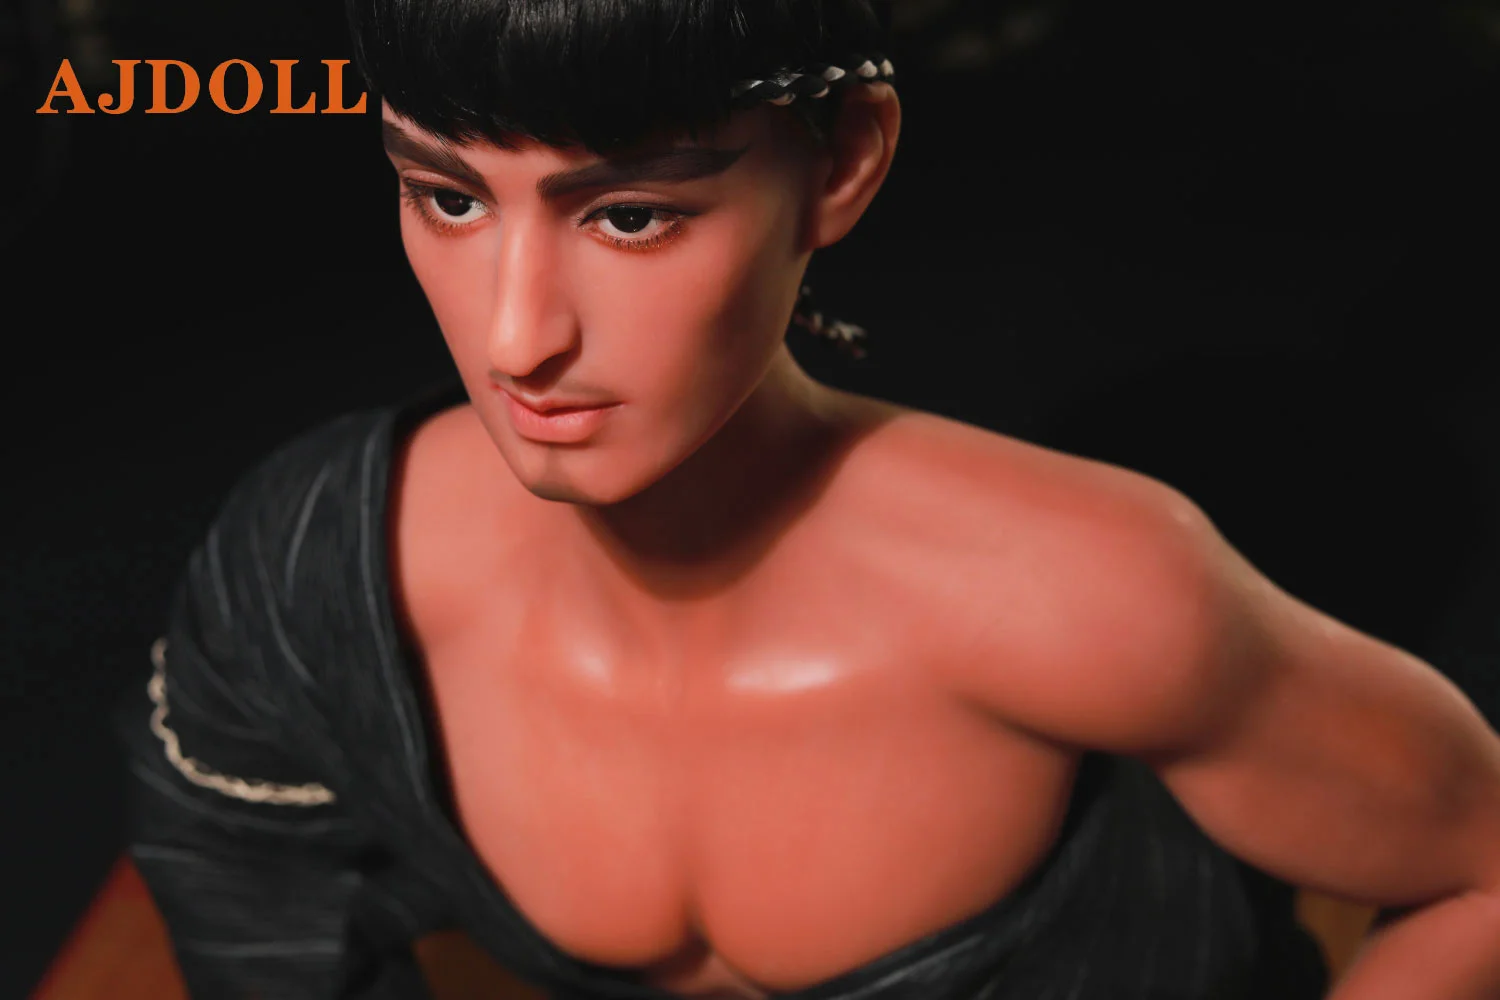 Male sex doll with exposed shoulders